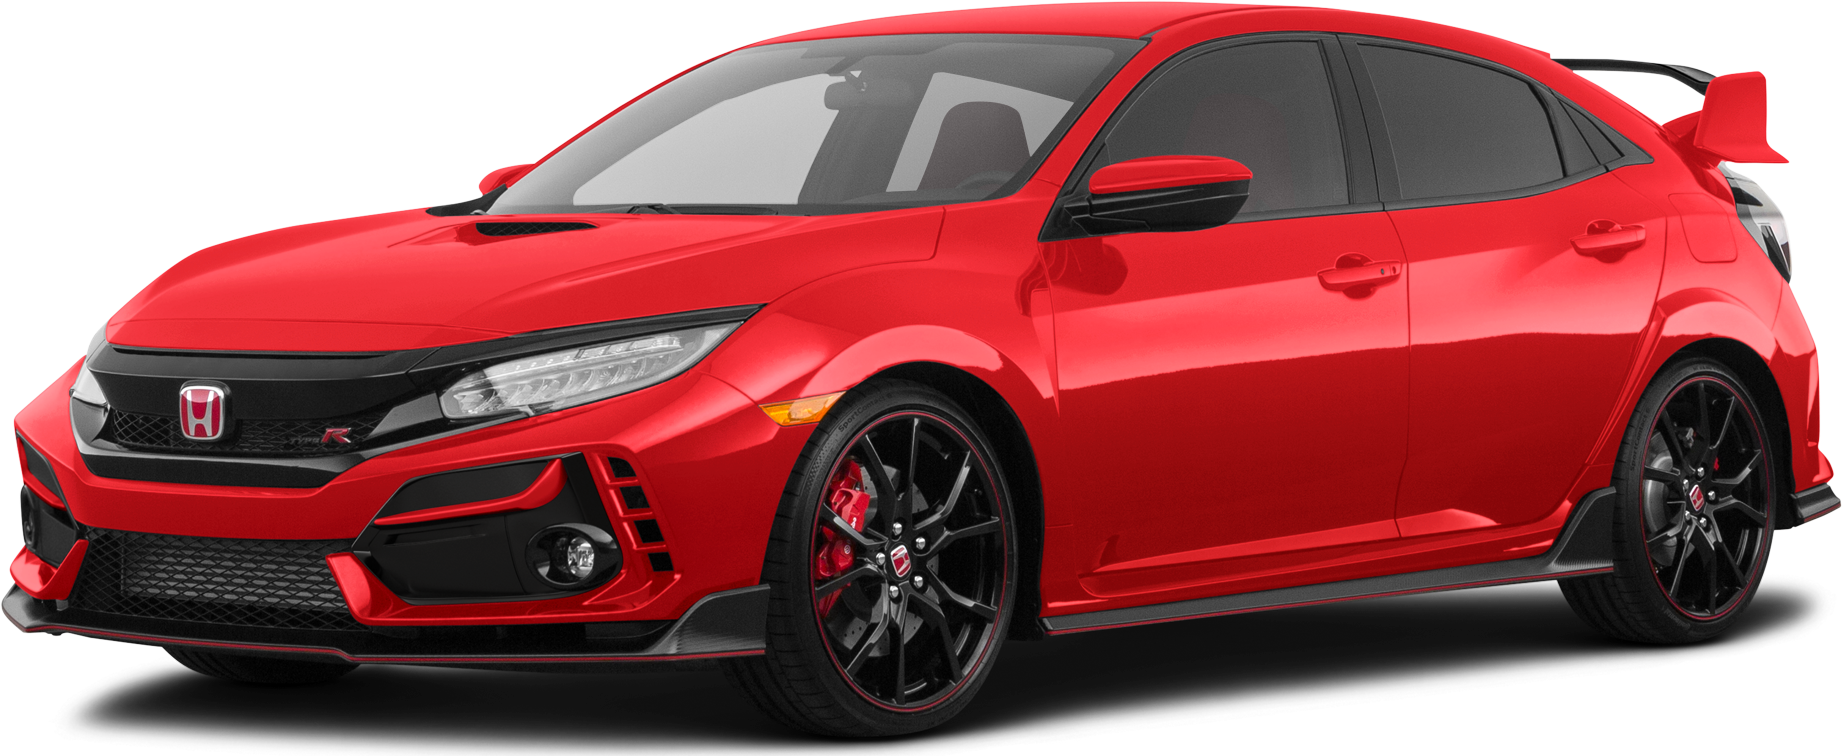 2021 Civic Type R Limited Edition: Release Date, Price, Specs